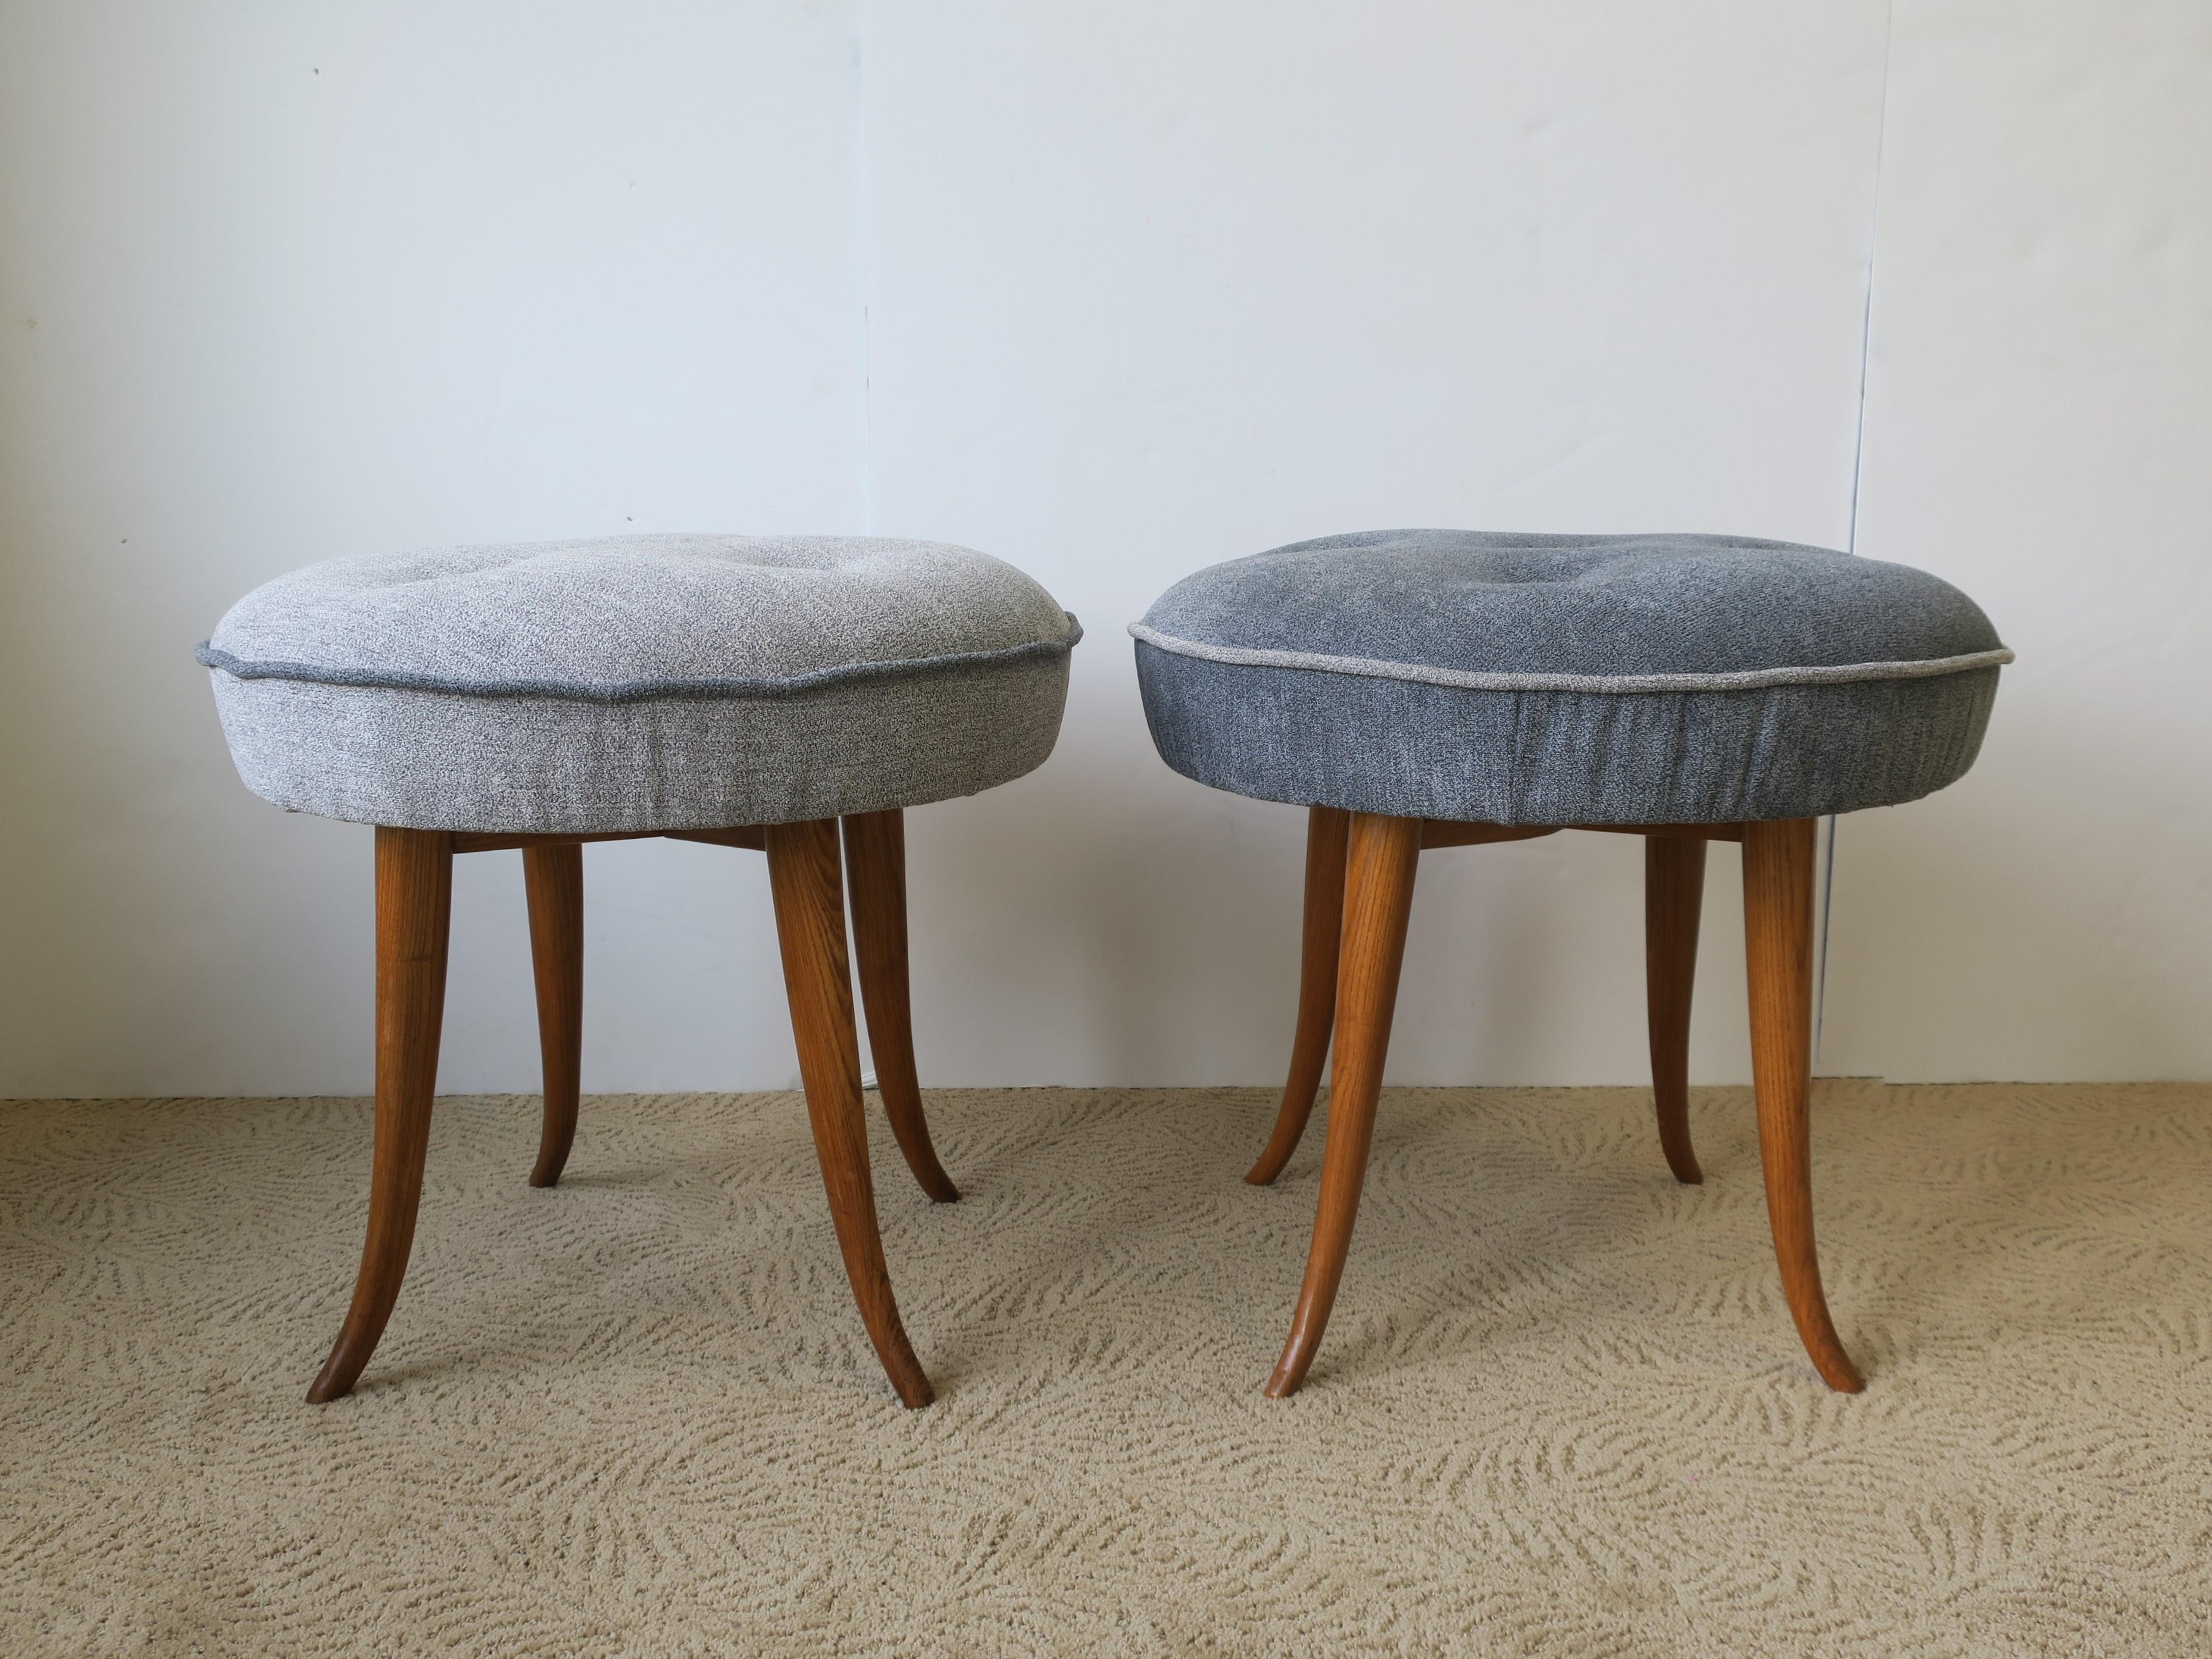 A beautiful pair of 20th century Austrian round upholstered wood stools or benches, in the style of designer Josef Frank, circa Mid-20th century or earlier, Austria. Stools have been newly/professionally reupholstered in a duo of blue (one light